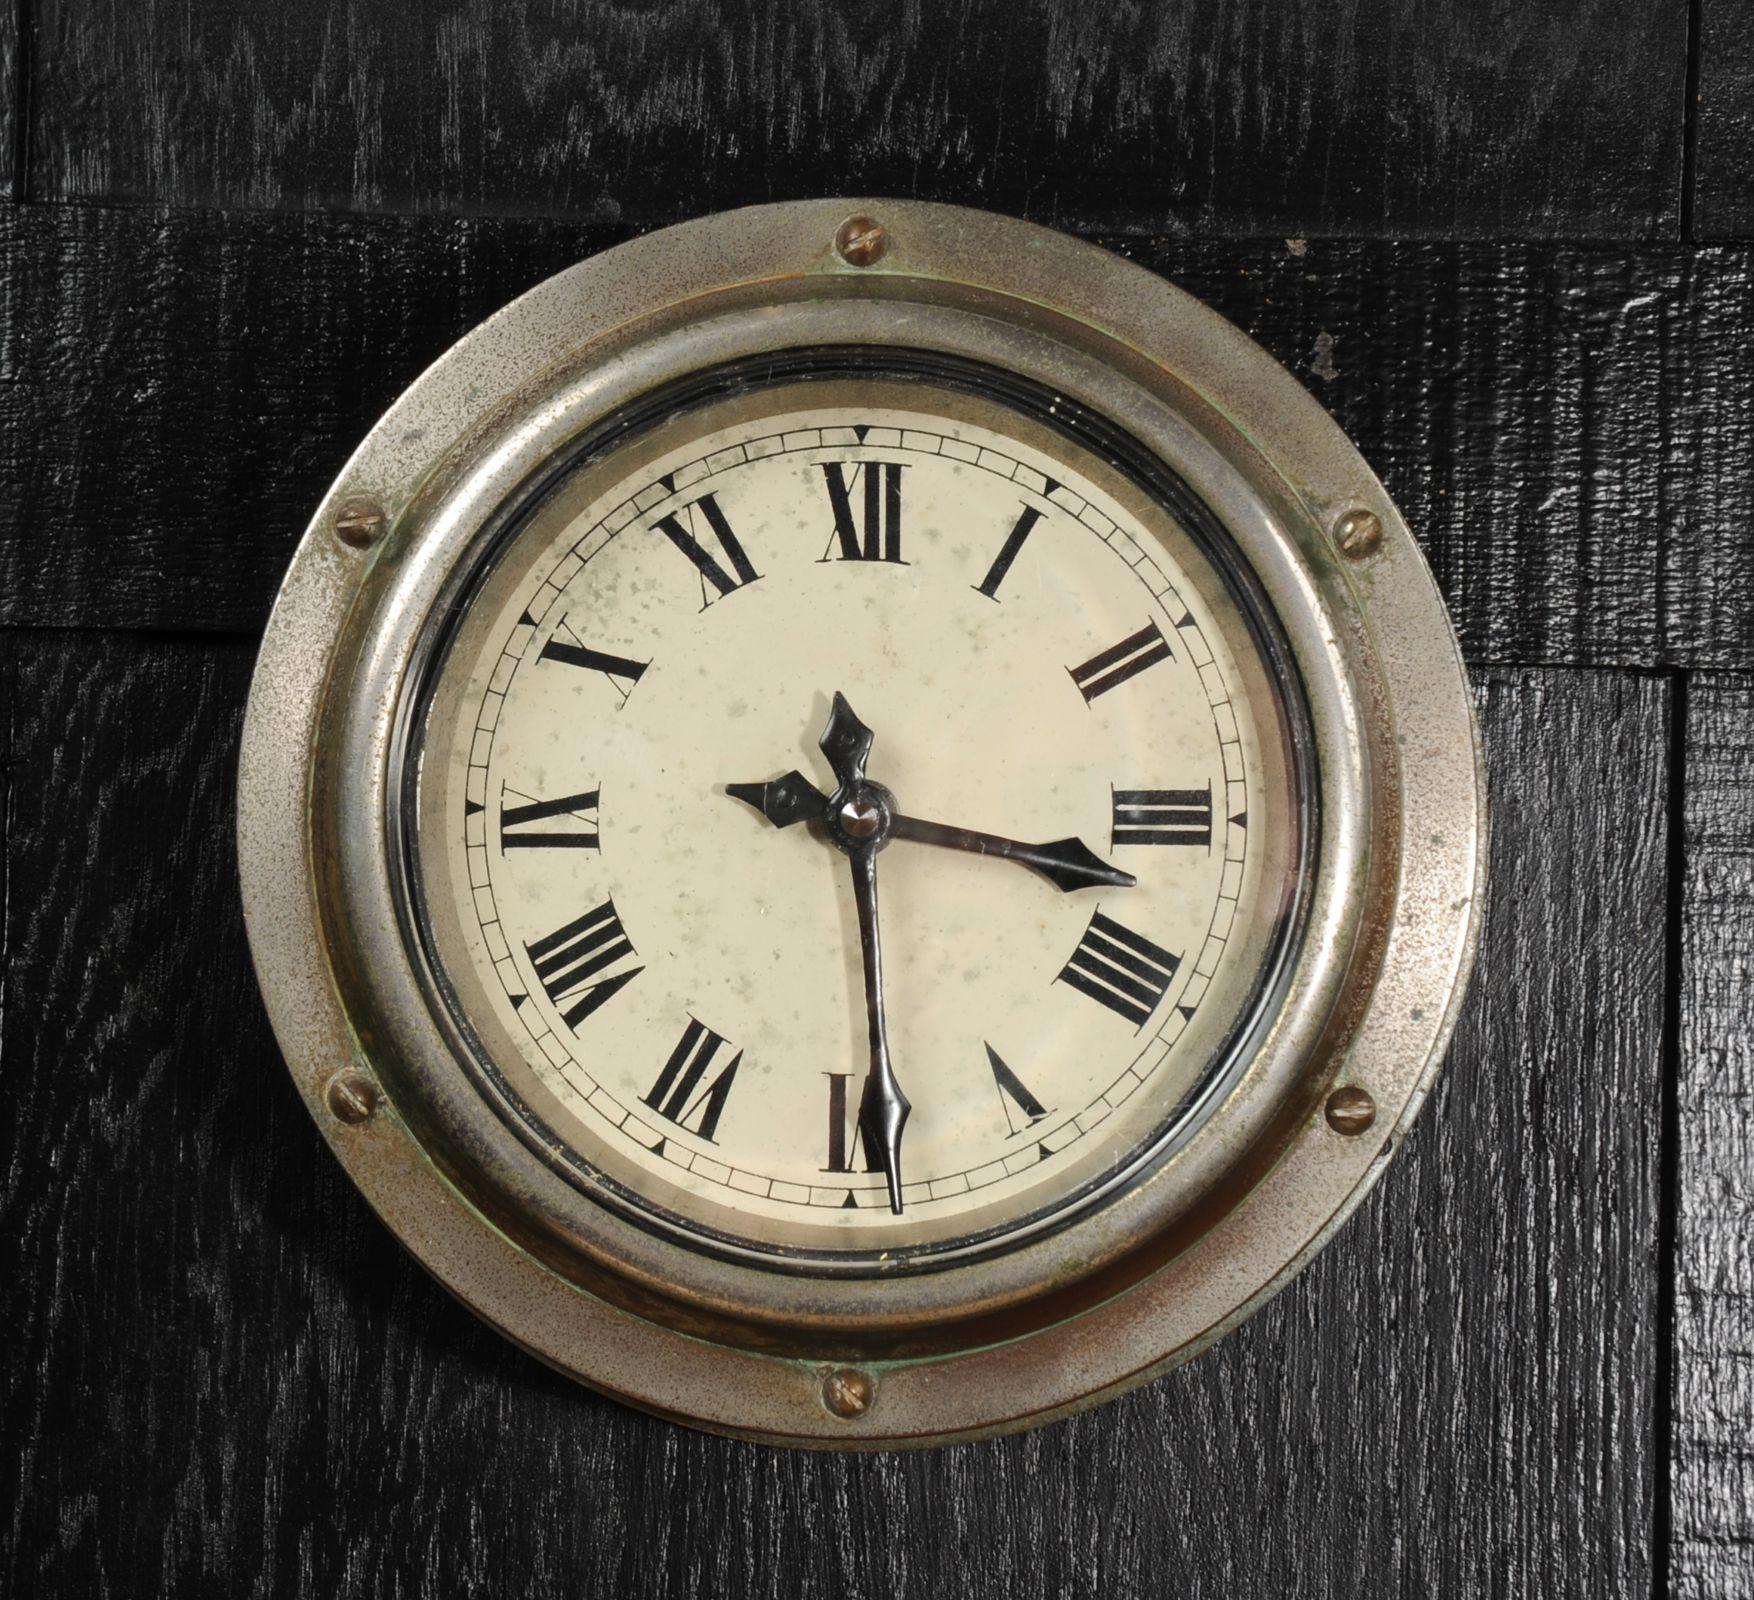 A wonderful, heavy bronze ship or Yacht bulkhead clock. Originally nickel plated, this has worn to a lovely rich brown patina with speckled old plating and green verdigris. A heavy bronze flange holding the thick beveled glass in place with a